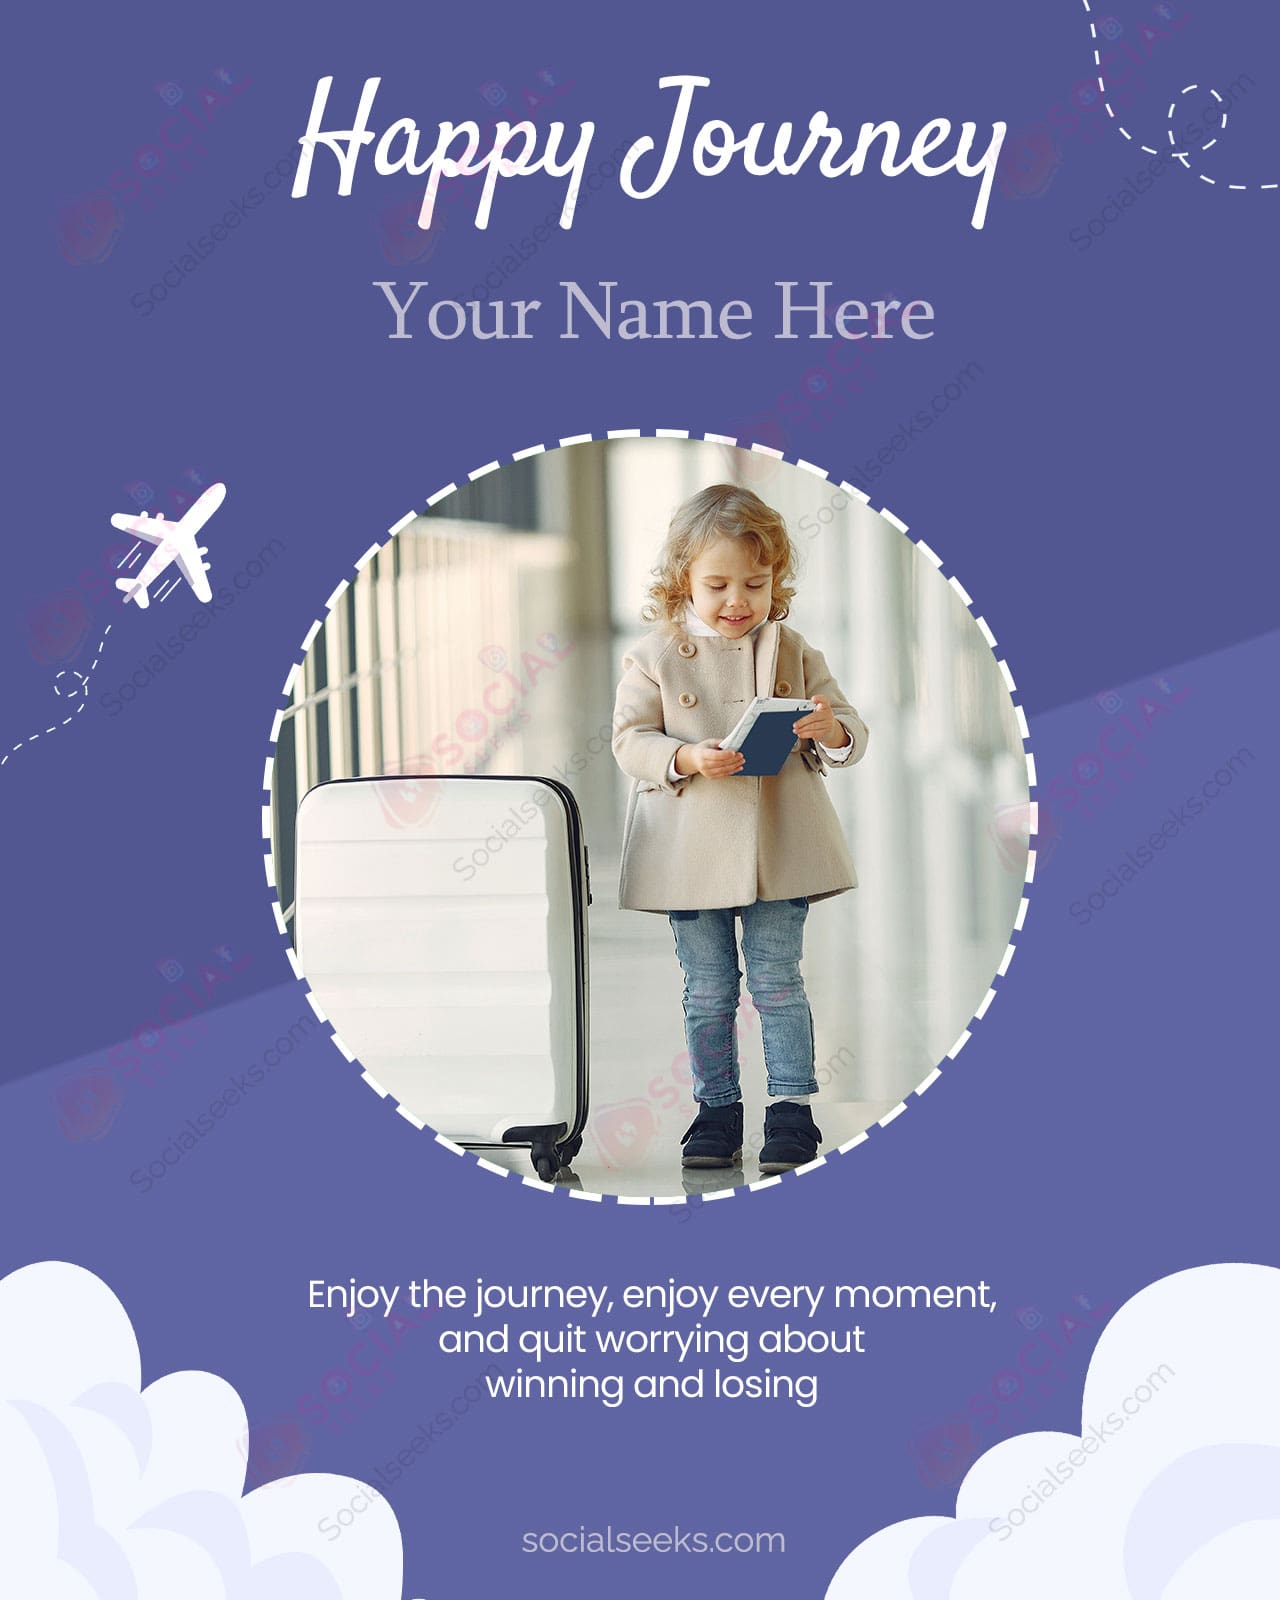 Happy Journey Wishes Greetings and Photo Frames With Name